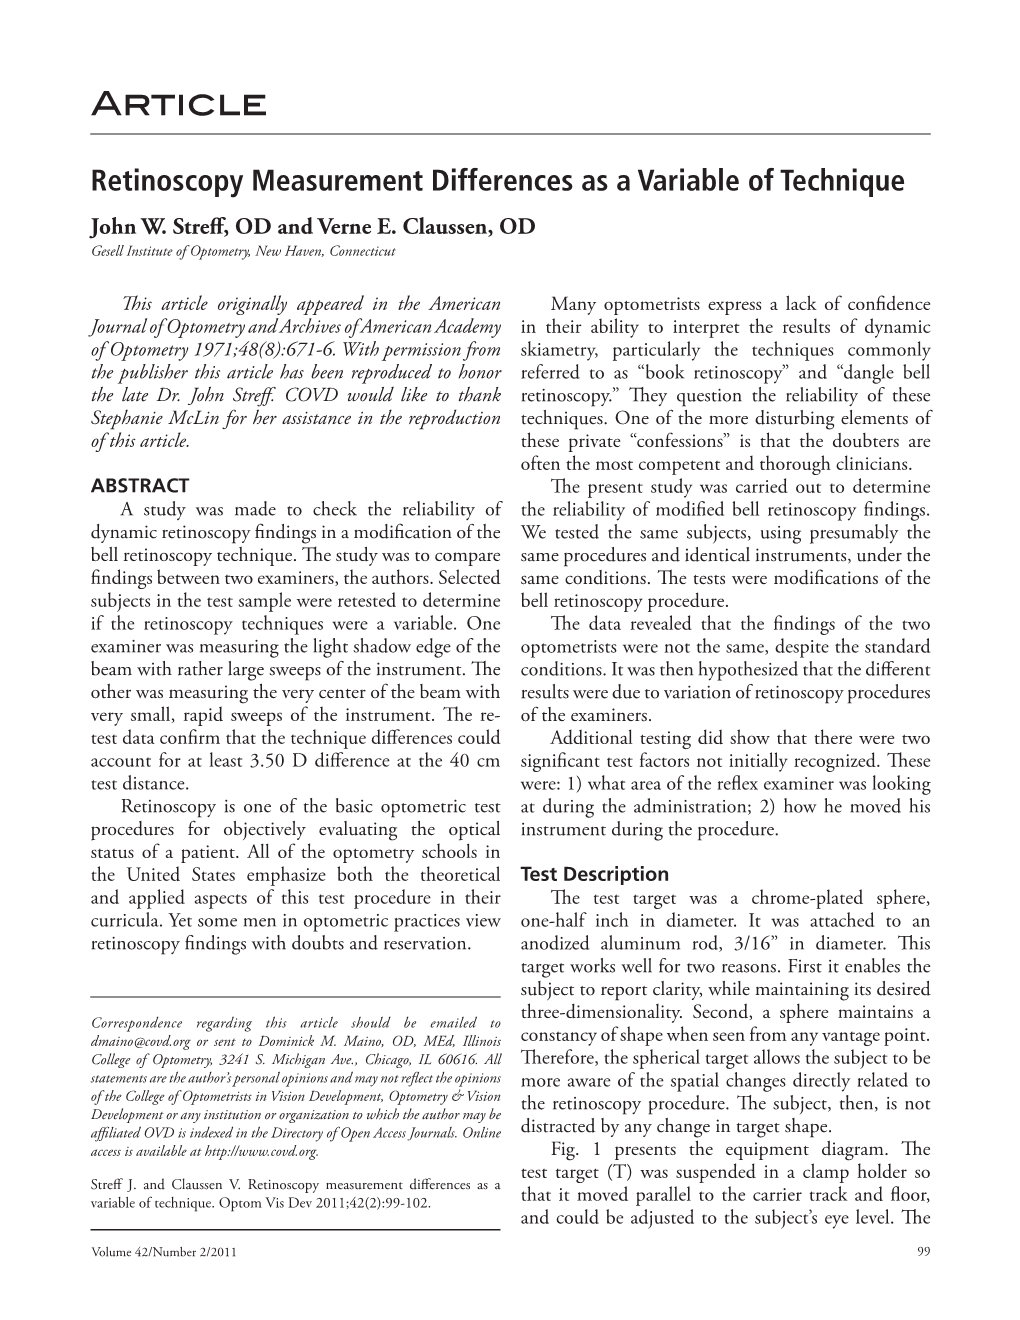 Retinoscopy Measurement Differences As a Variable of Technique John W